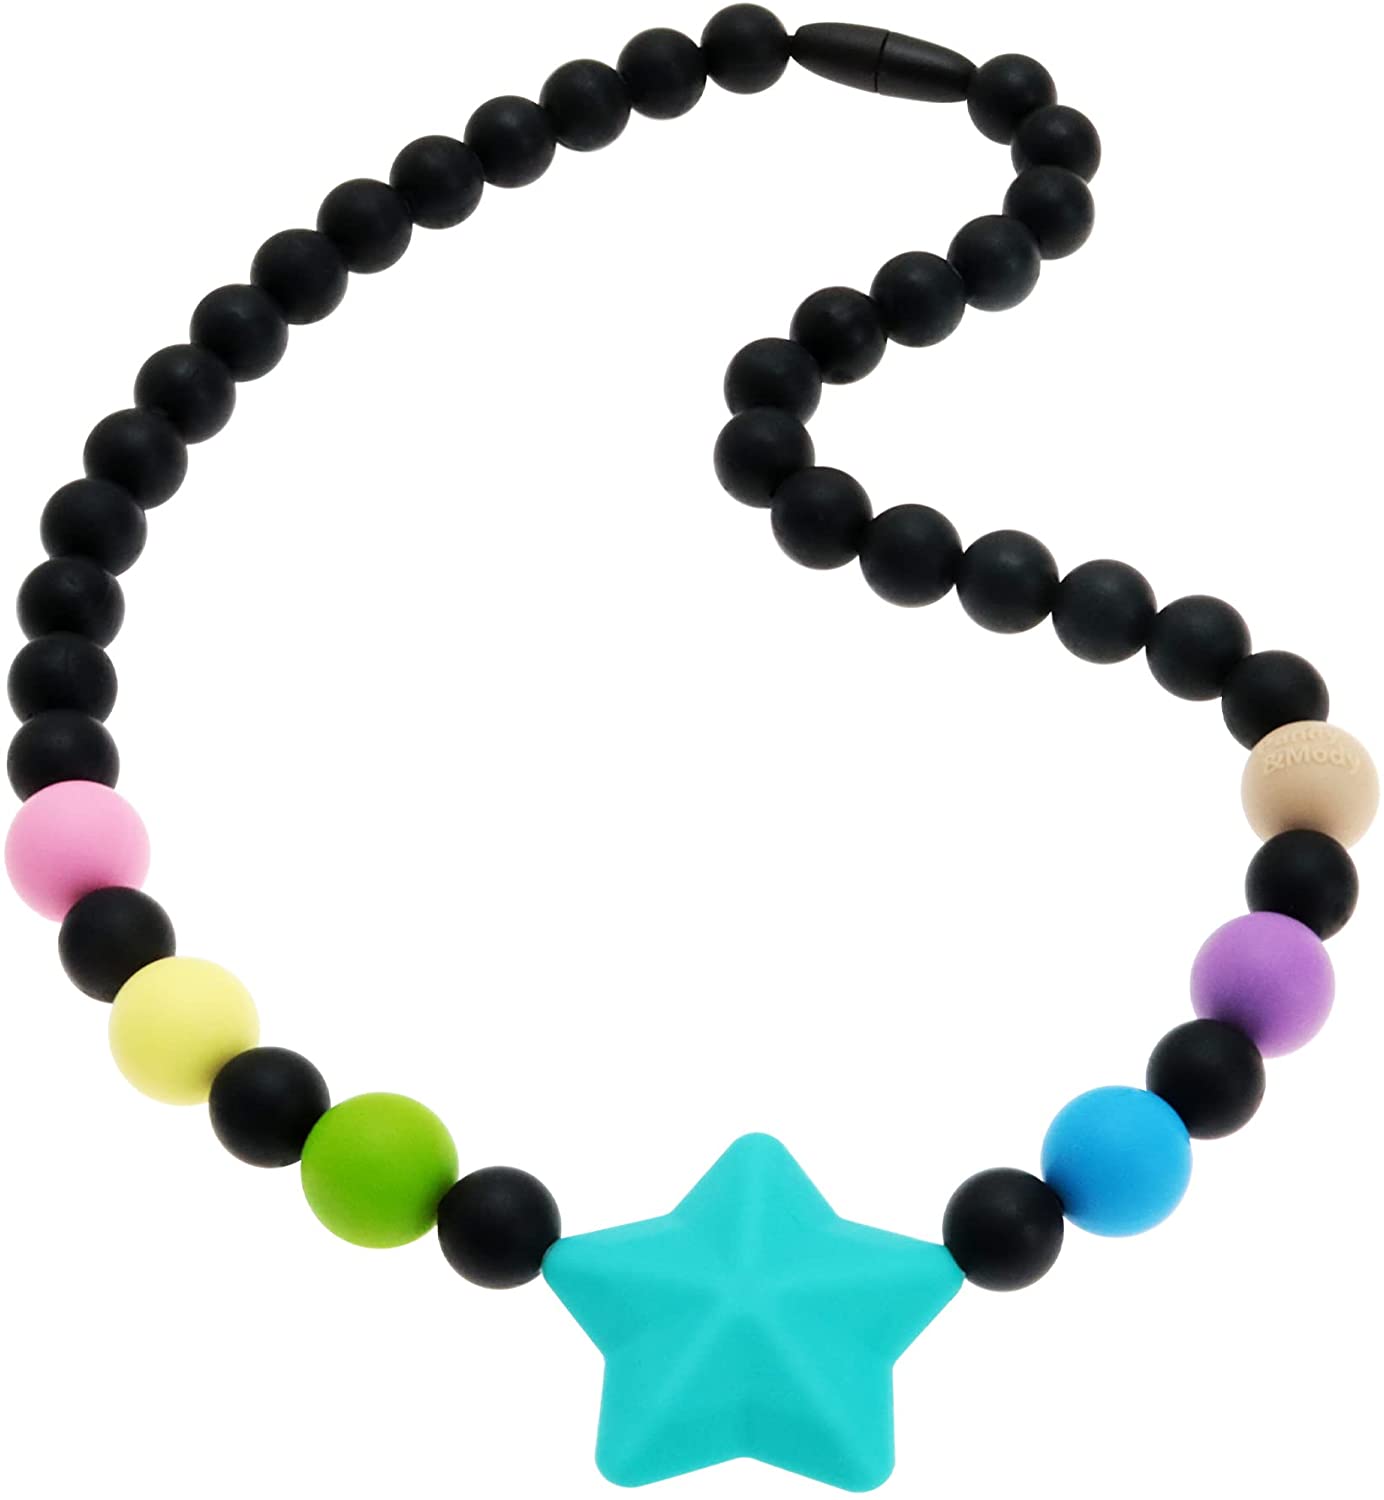 Panny & Mody Sensory Chew Necklace for Kids with Autism ADHD Chewy Oral Toys 4pc 